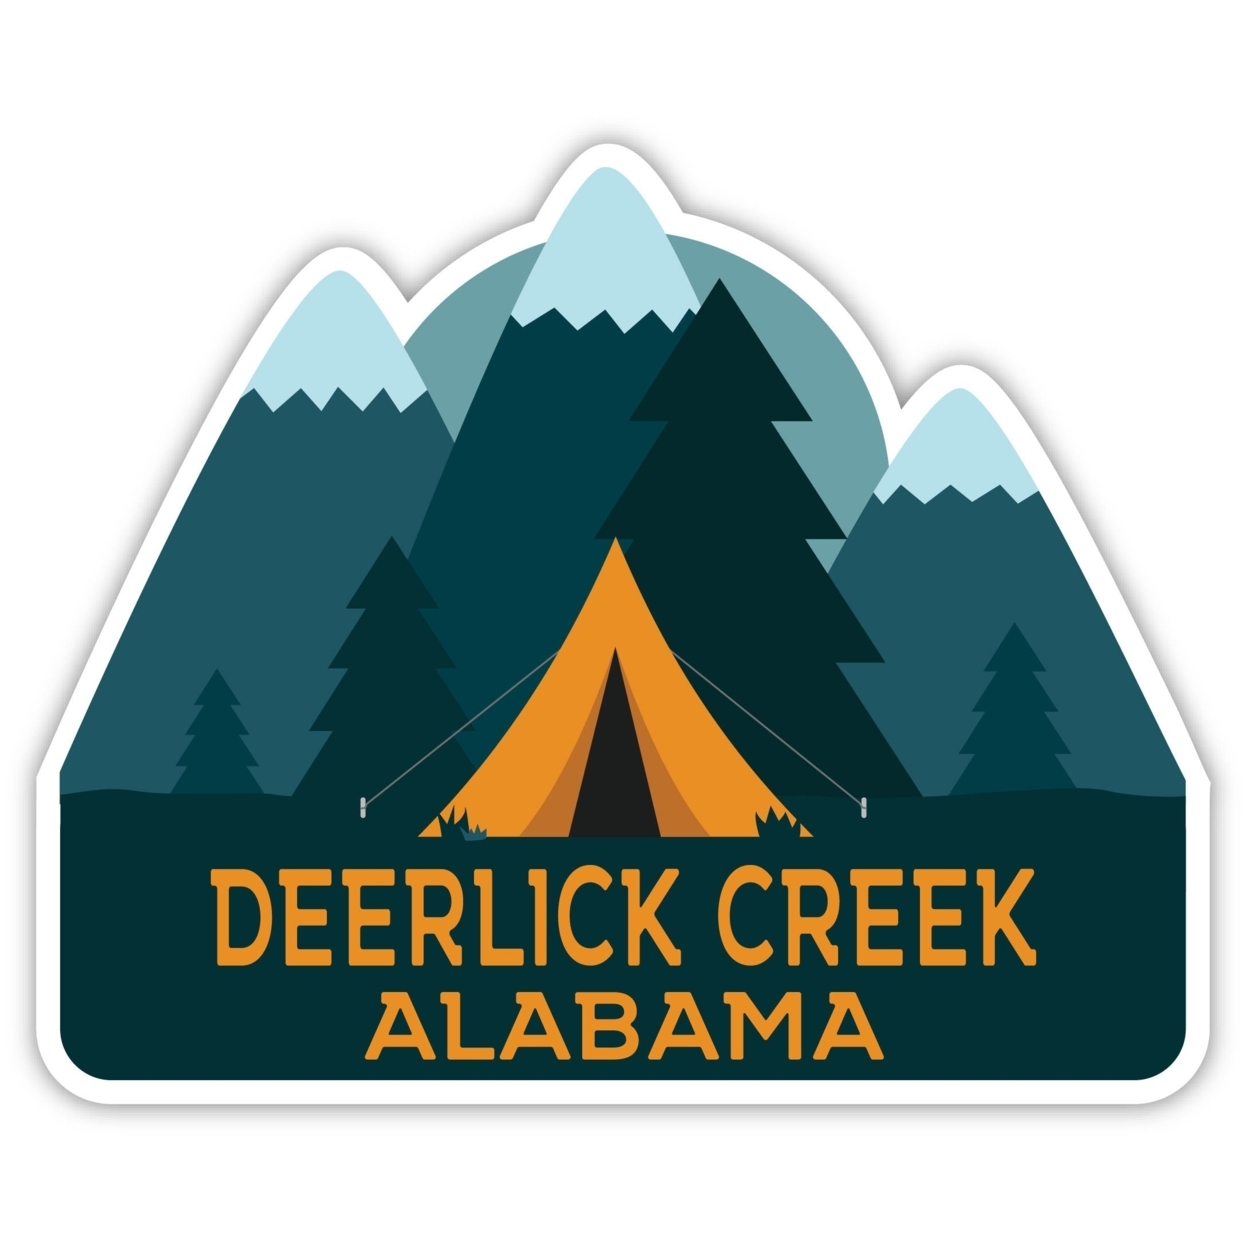 Deerlick Creek Alabama Souvenir Decorative Stickers (Choose Theme And Size) - 4-Pack, 2-Inch, Tent